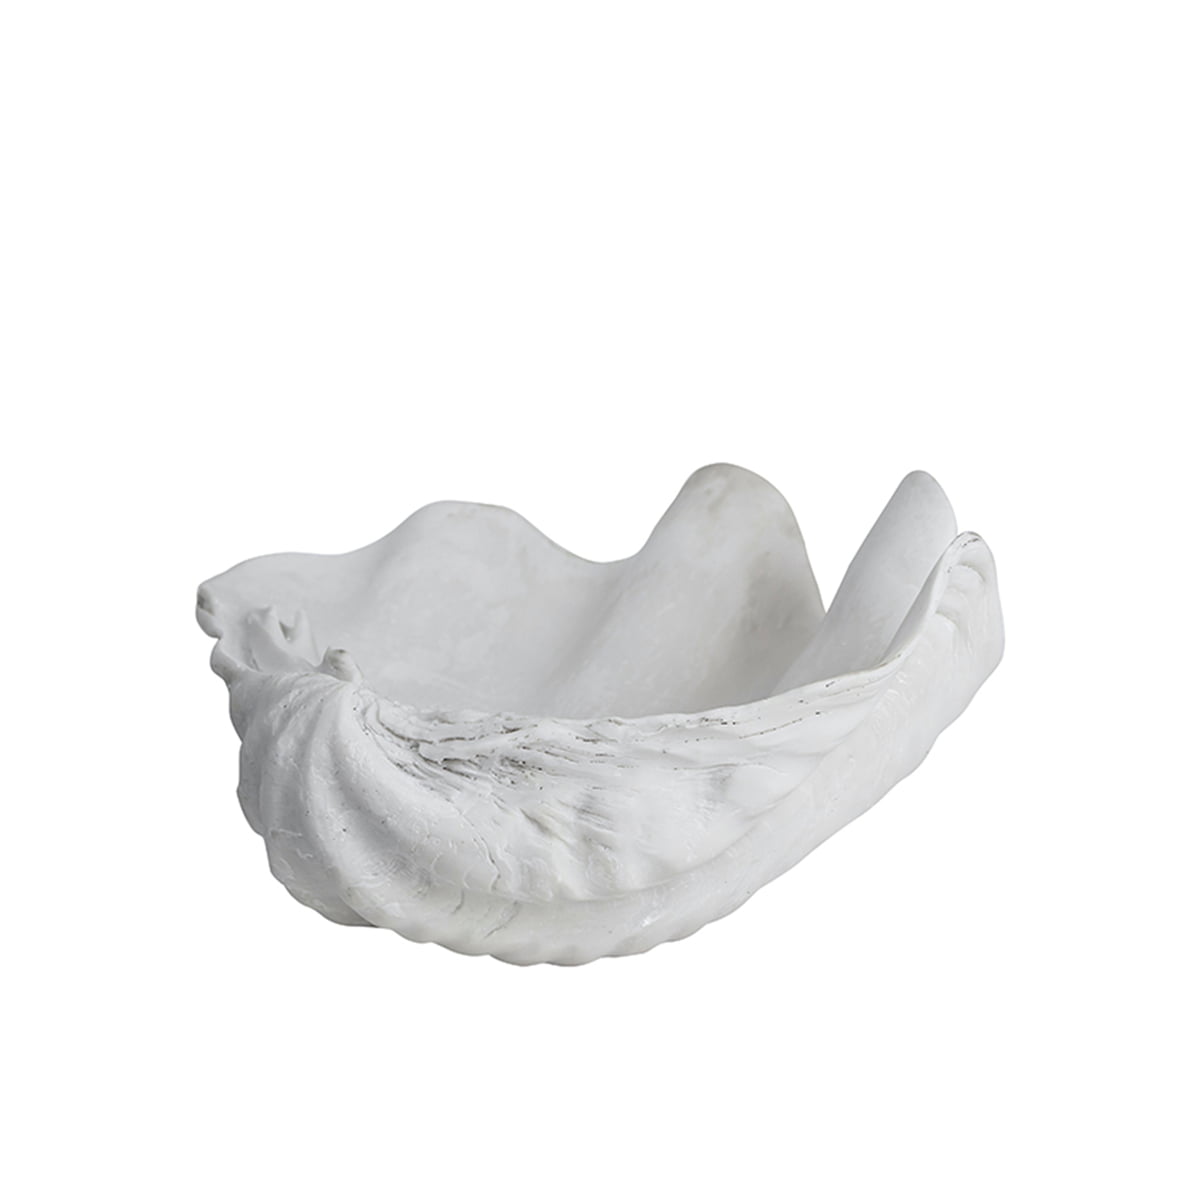 Clam Shell Sculpture - White 24 x 20 x 12cm - OFO Outdoor Furniture